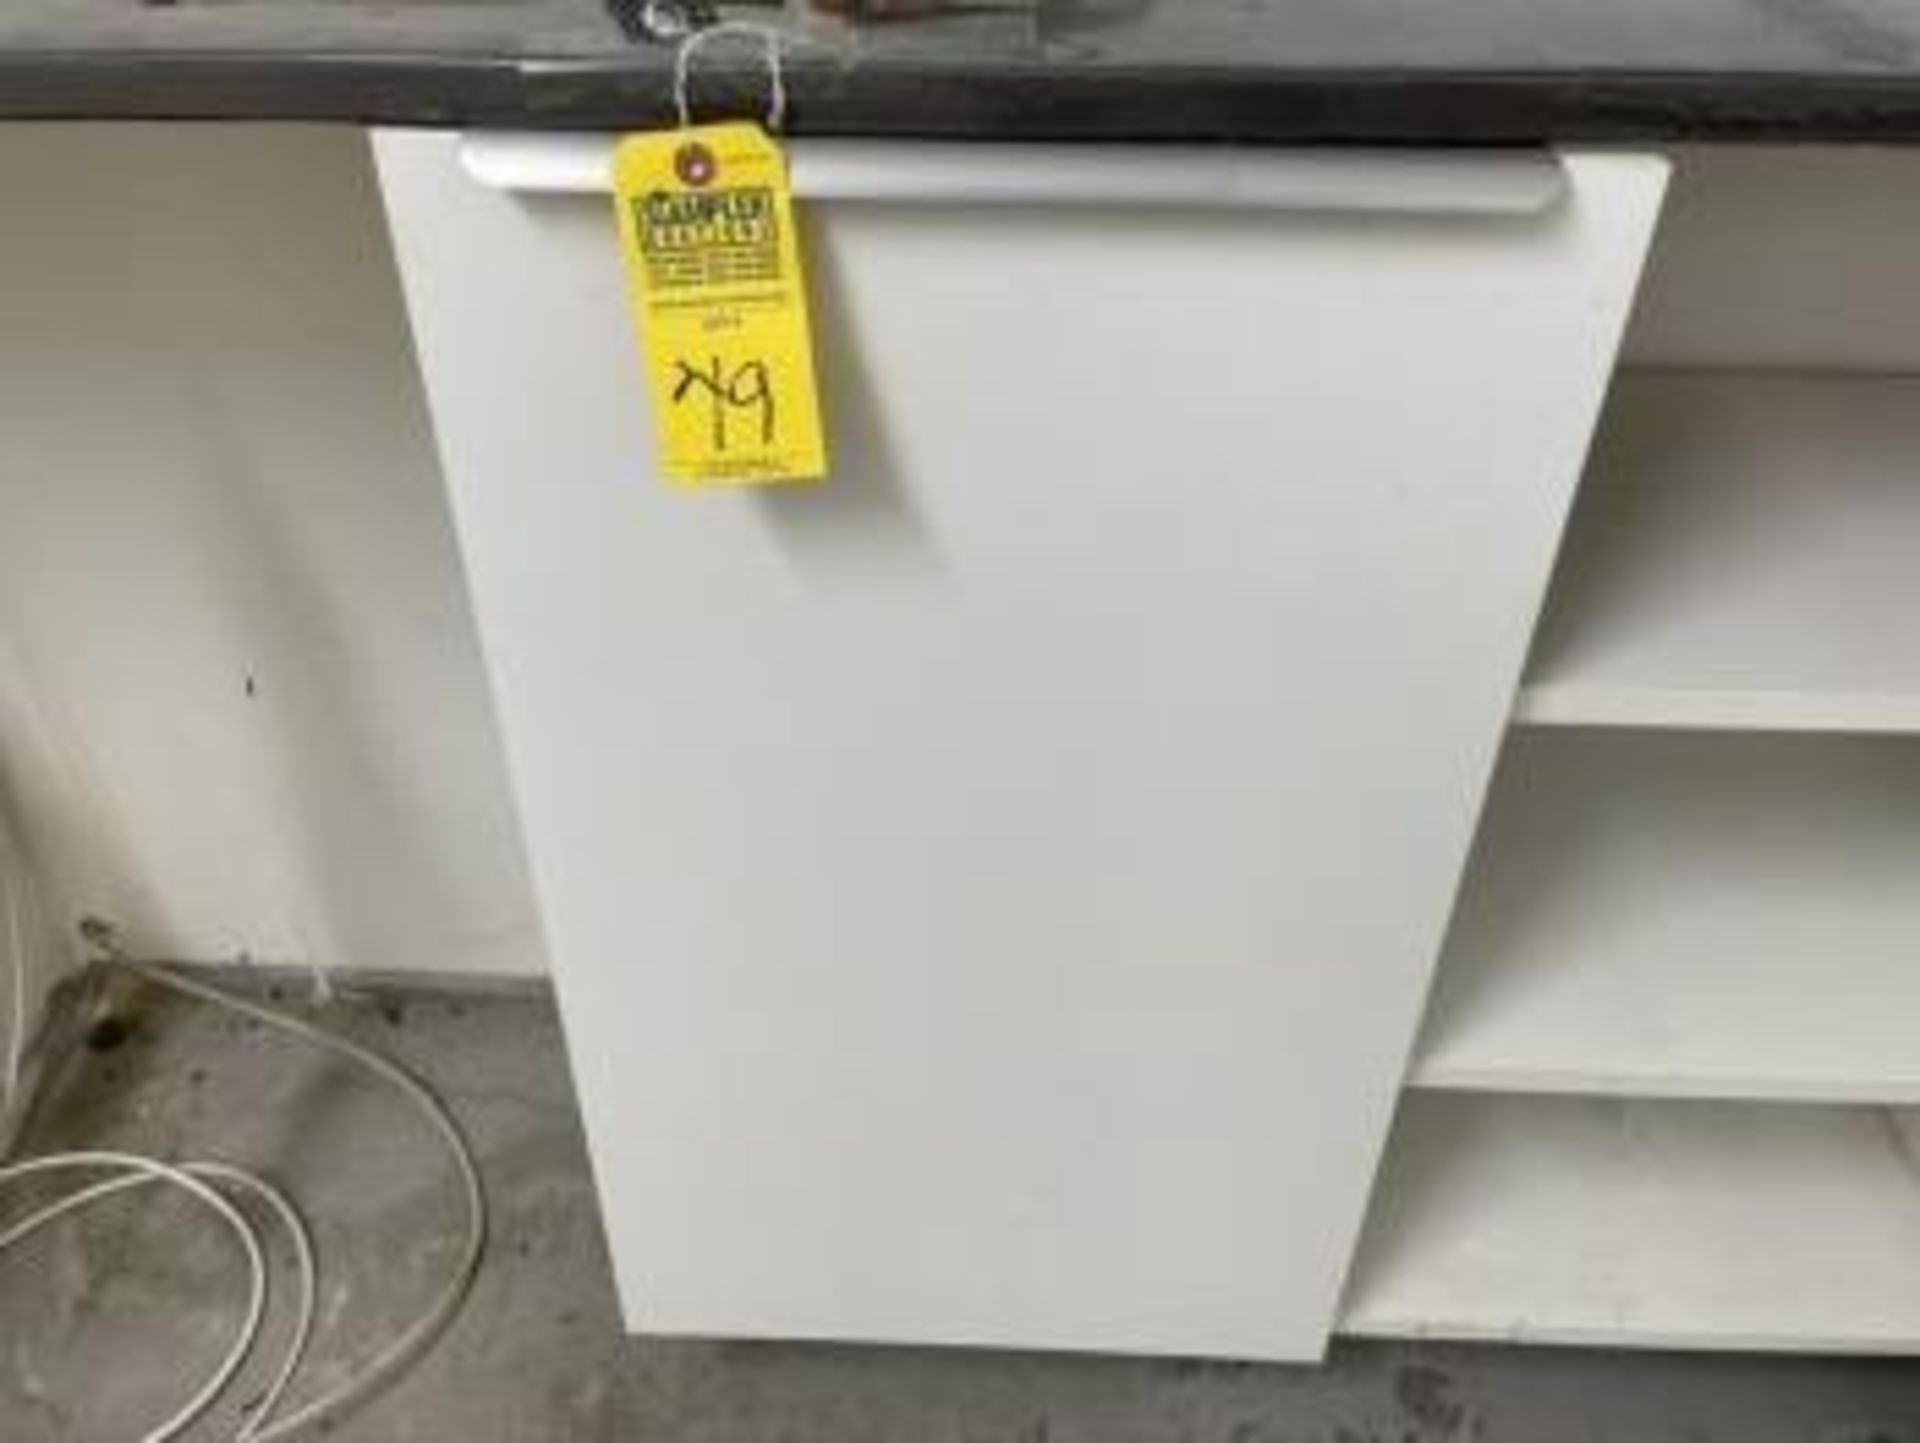 LOT WHITE IKEA CABINETS - BASE CABINETS, 7 DRAWERS, 2 DOORS, 2 OVERHEAD CABINETS (LOCATED IN HIALEAH - Image 2 of 3